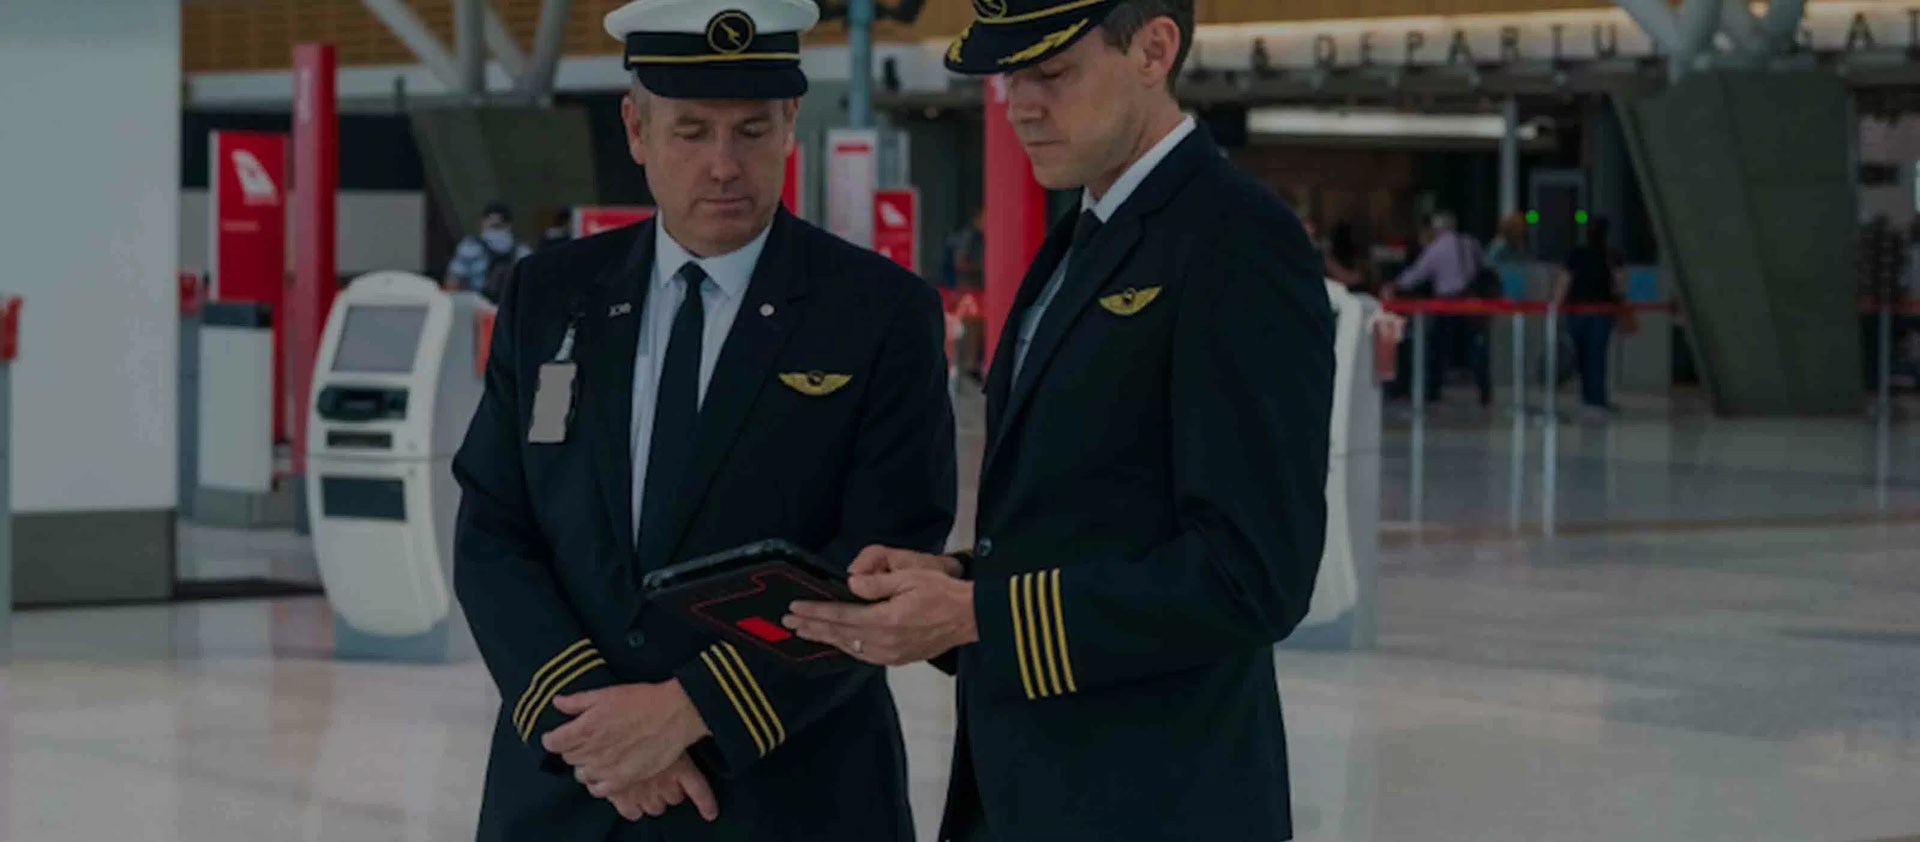 Pilots in the airport